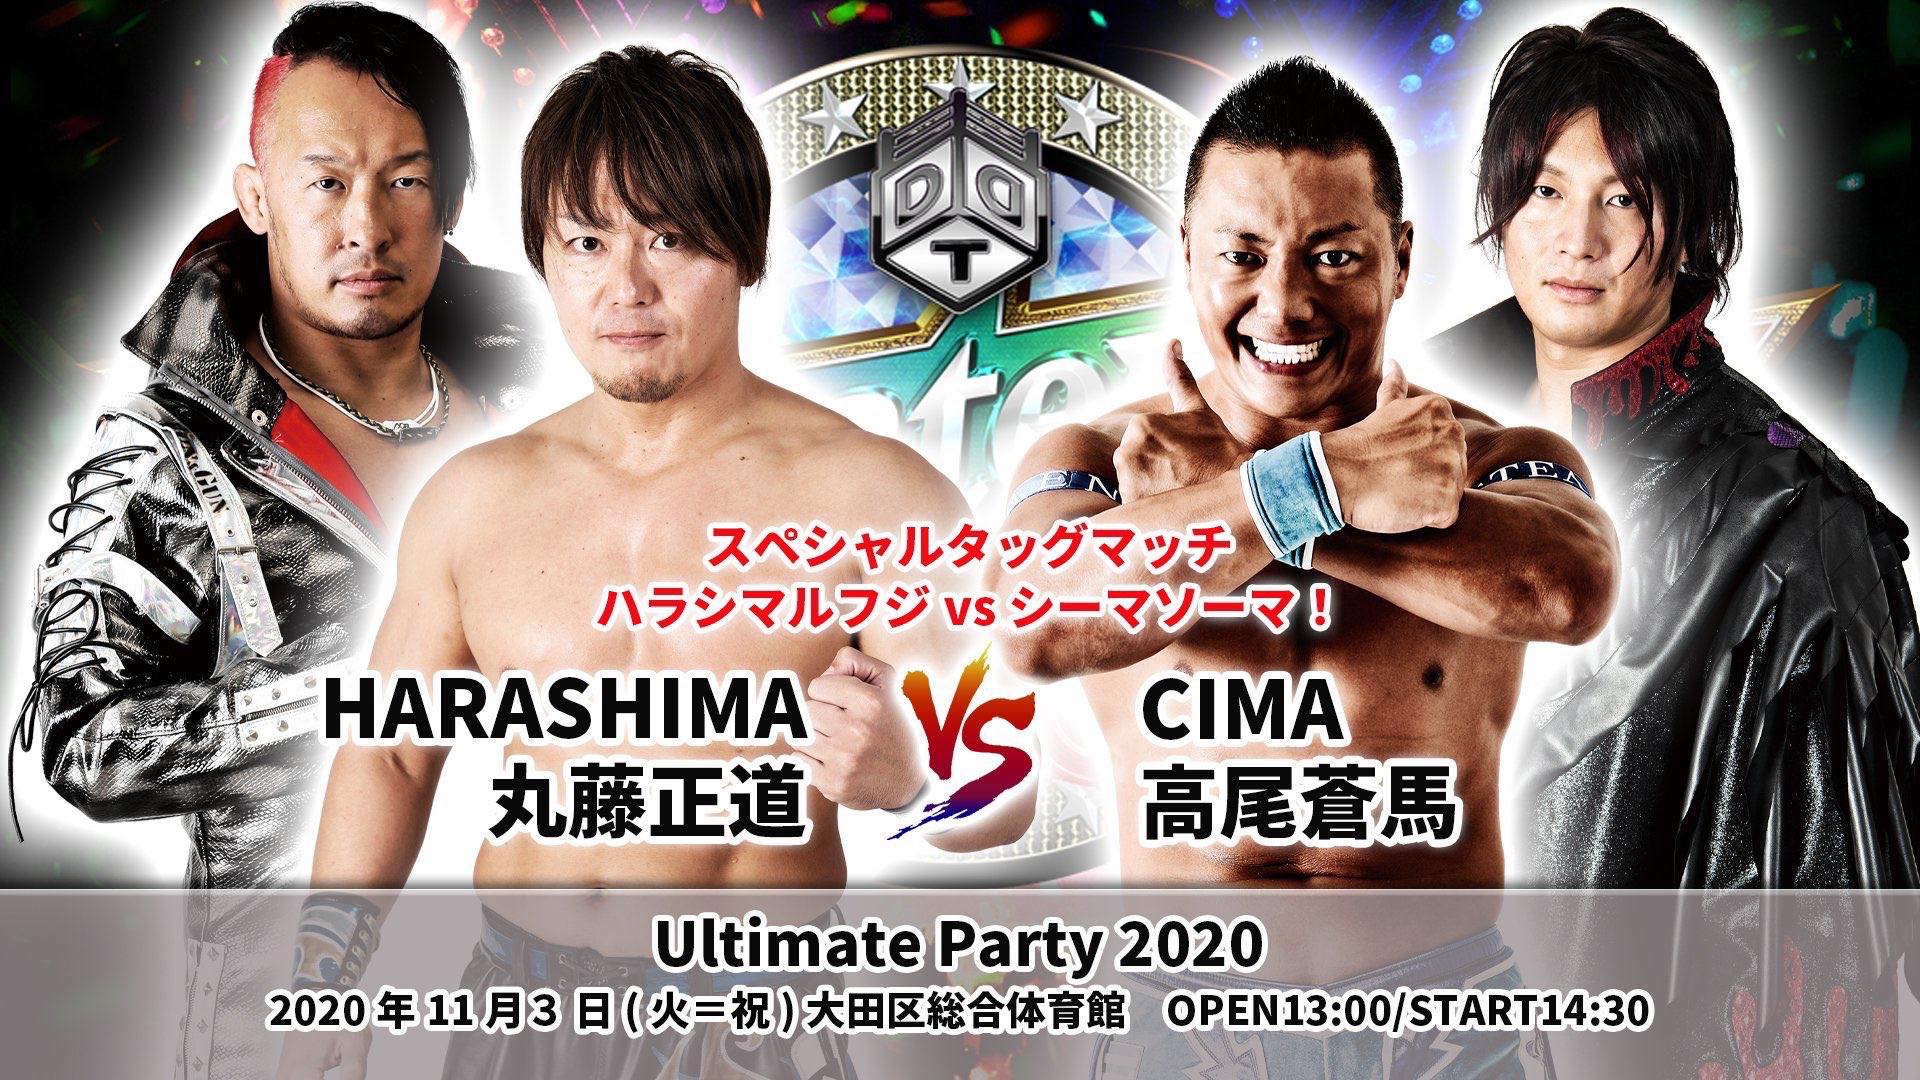 DDT ULTIMATE PARTY 2020 Preview